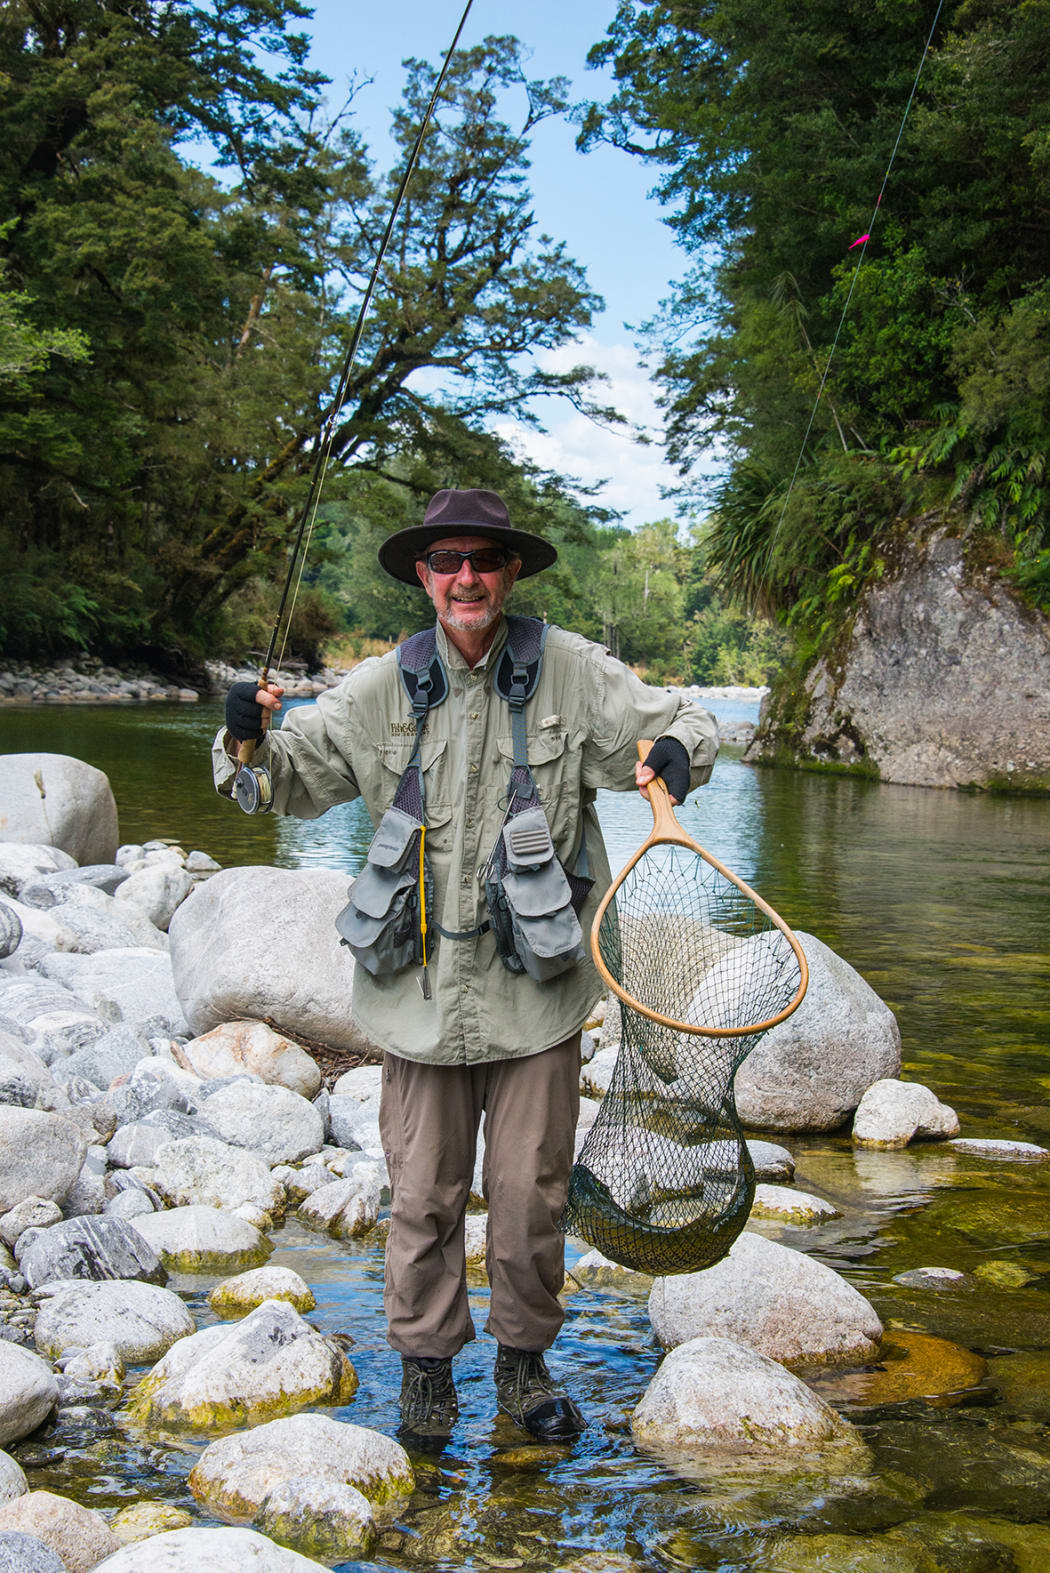 Les Hill, who's the author of 'Hooked for Life: A Celebration of Fly Fishing'.